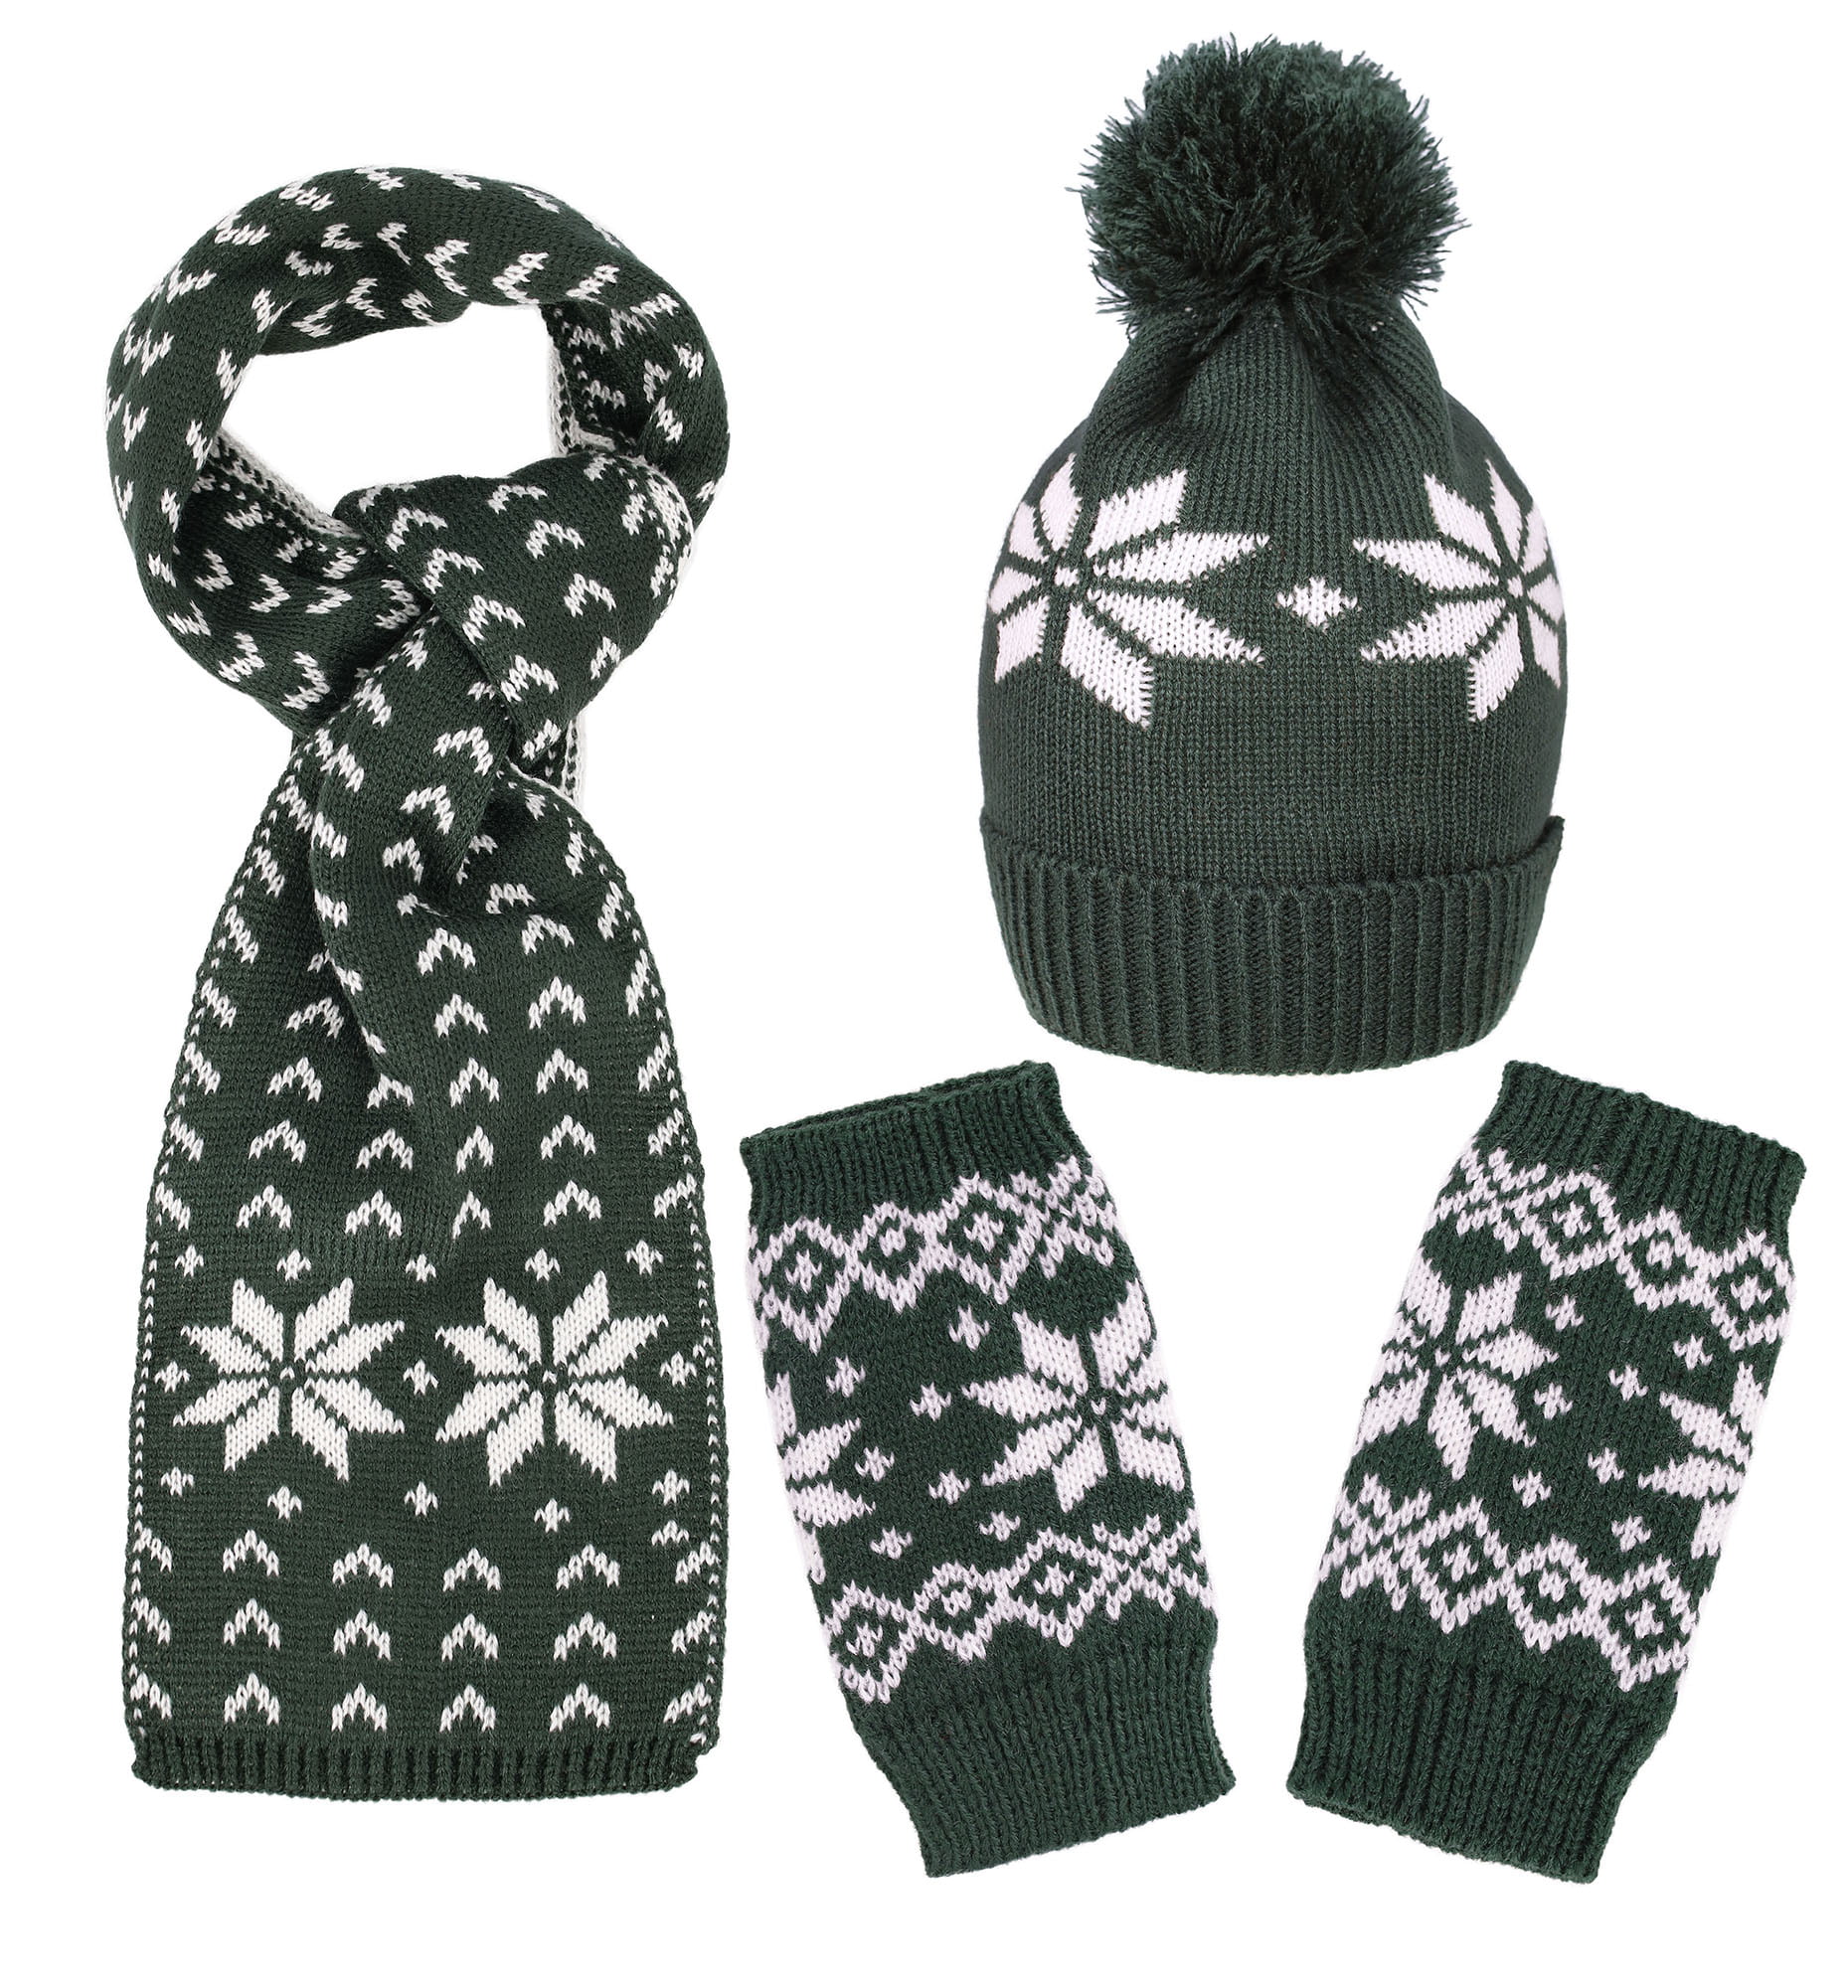 Simplicity Simplicity Child Winter Knitted Warm Gloves Scarf Hat Set, 3593_Green